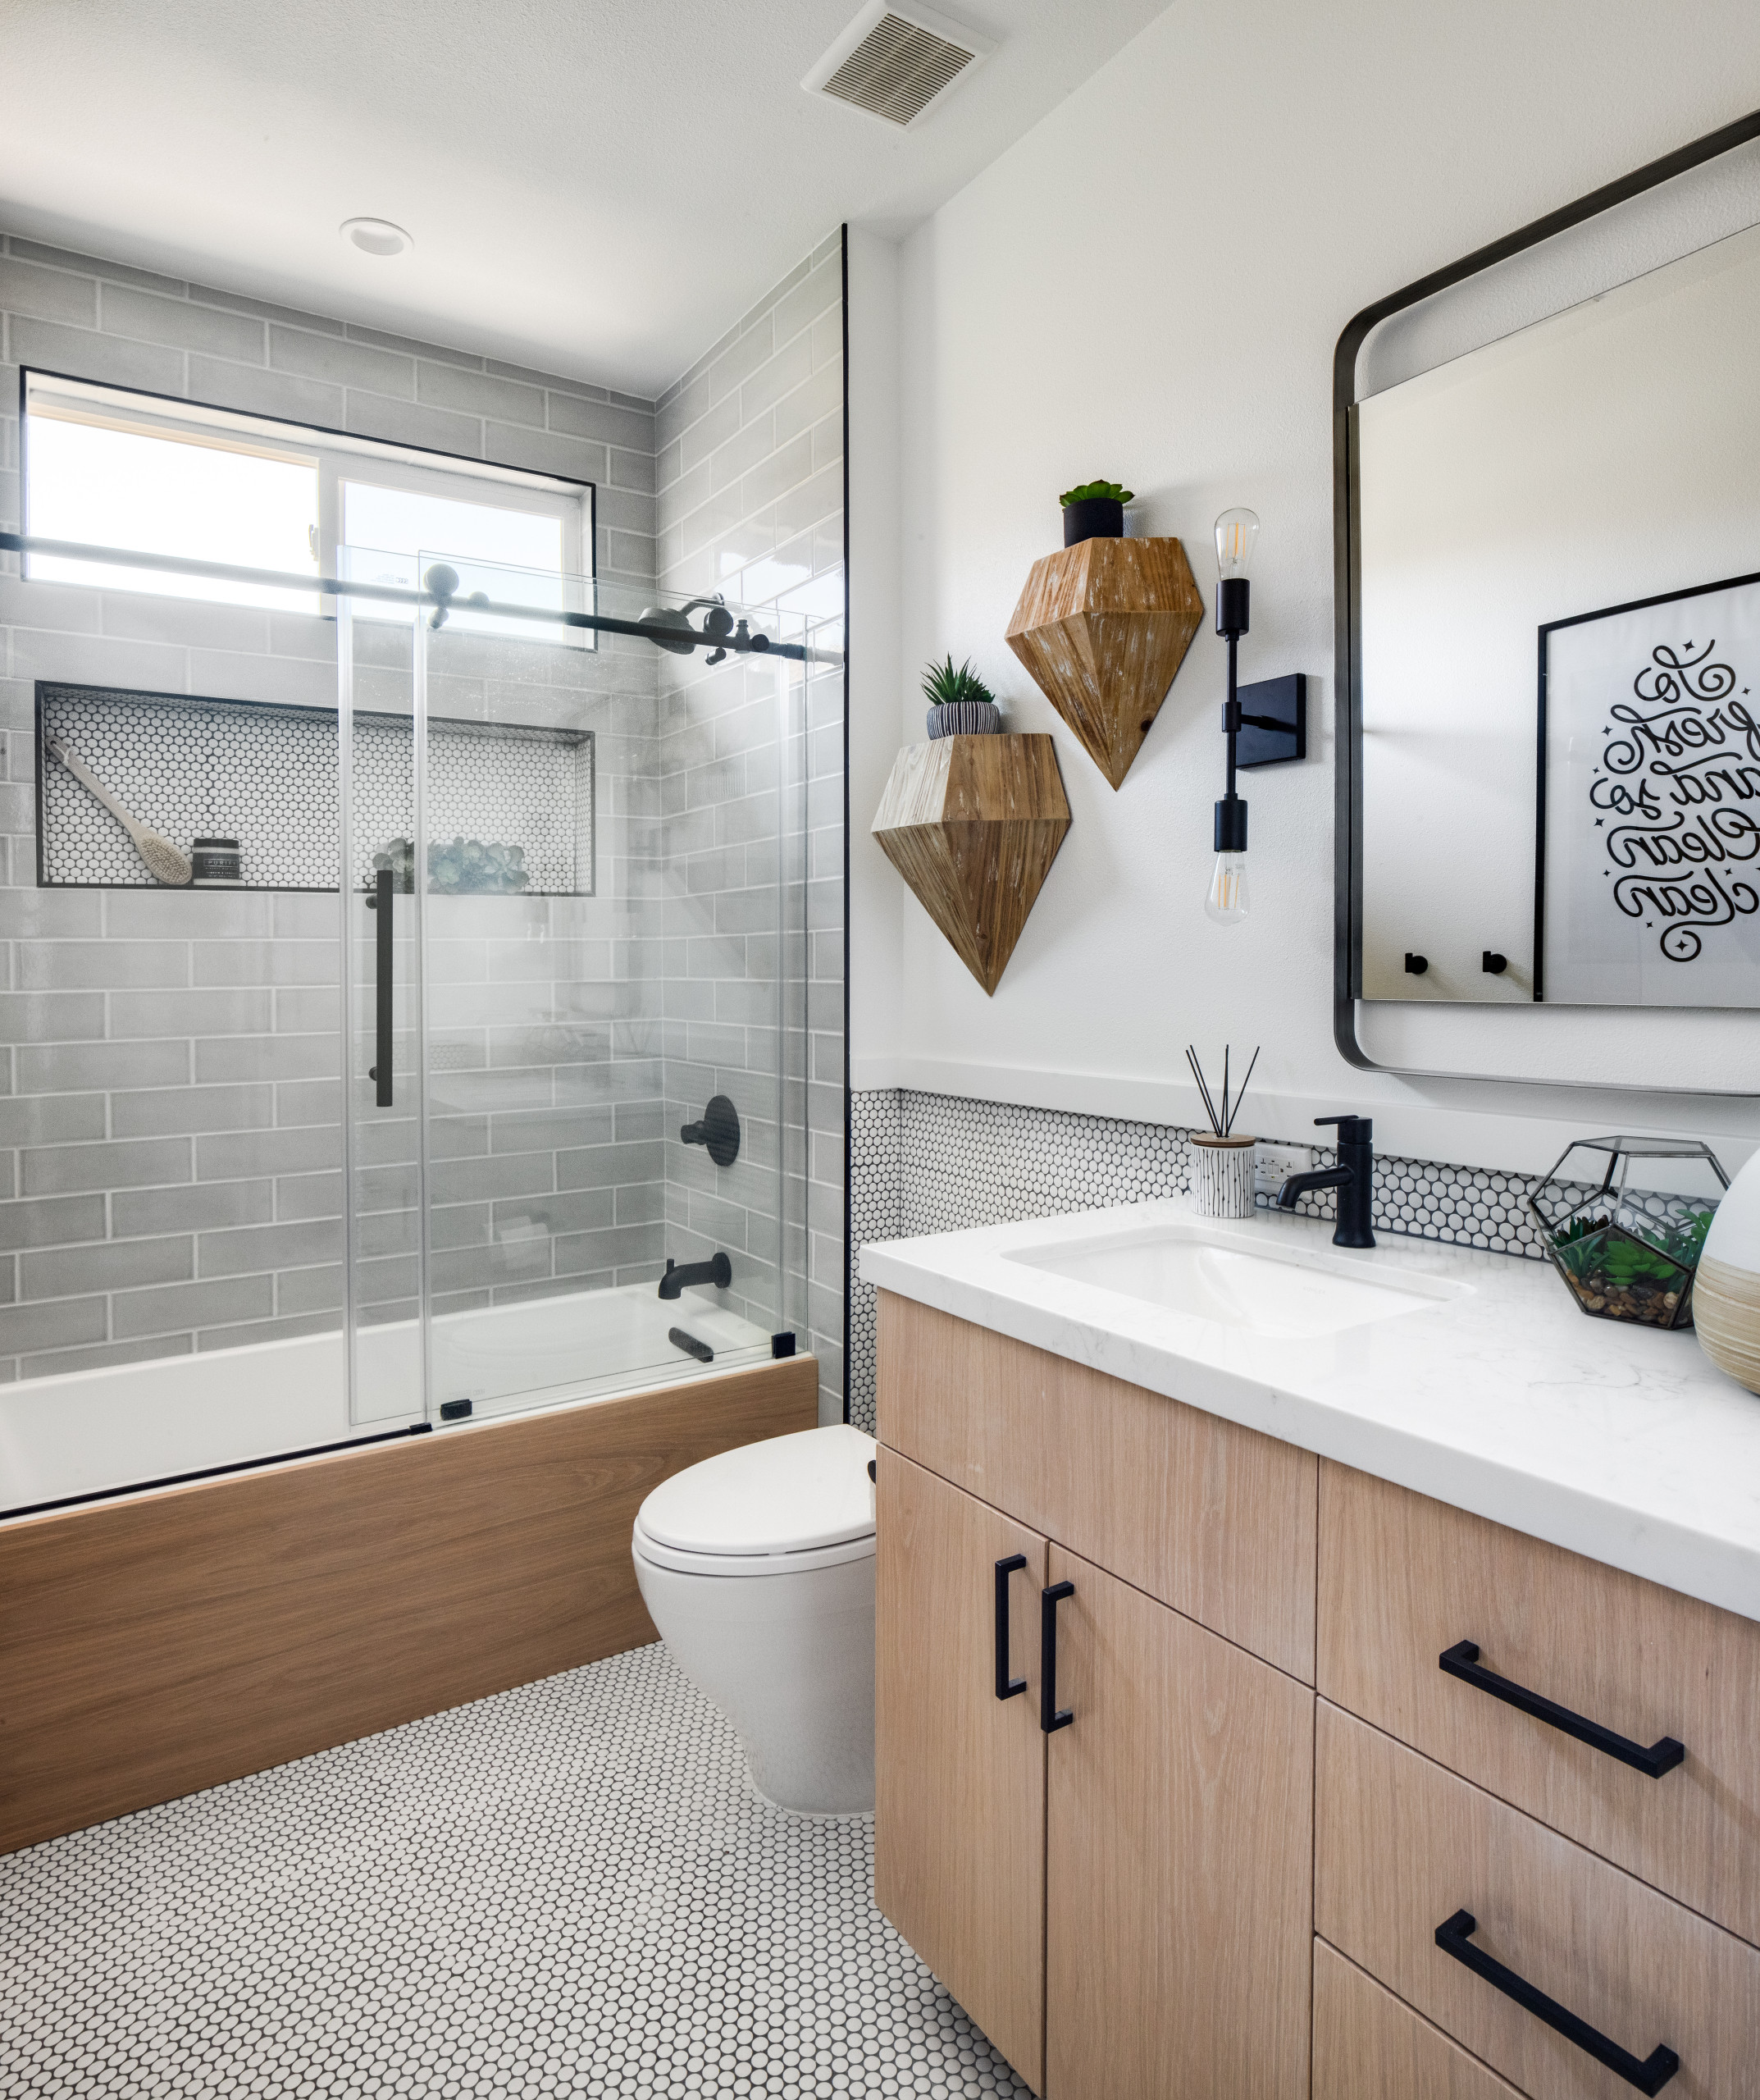 Excelent kids bathroom ideas photo gallery 75 Beautiful Small Kids Bathroom Pictures Ideas July 2021 Houzz